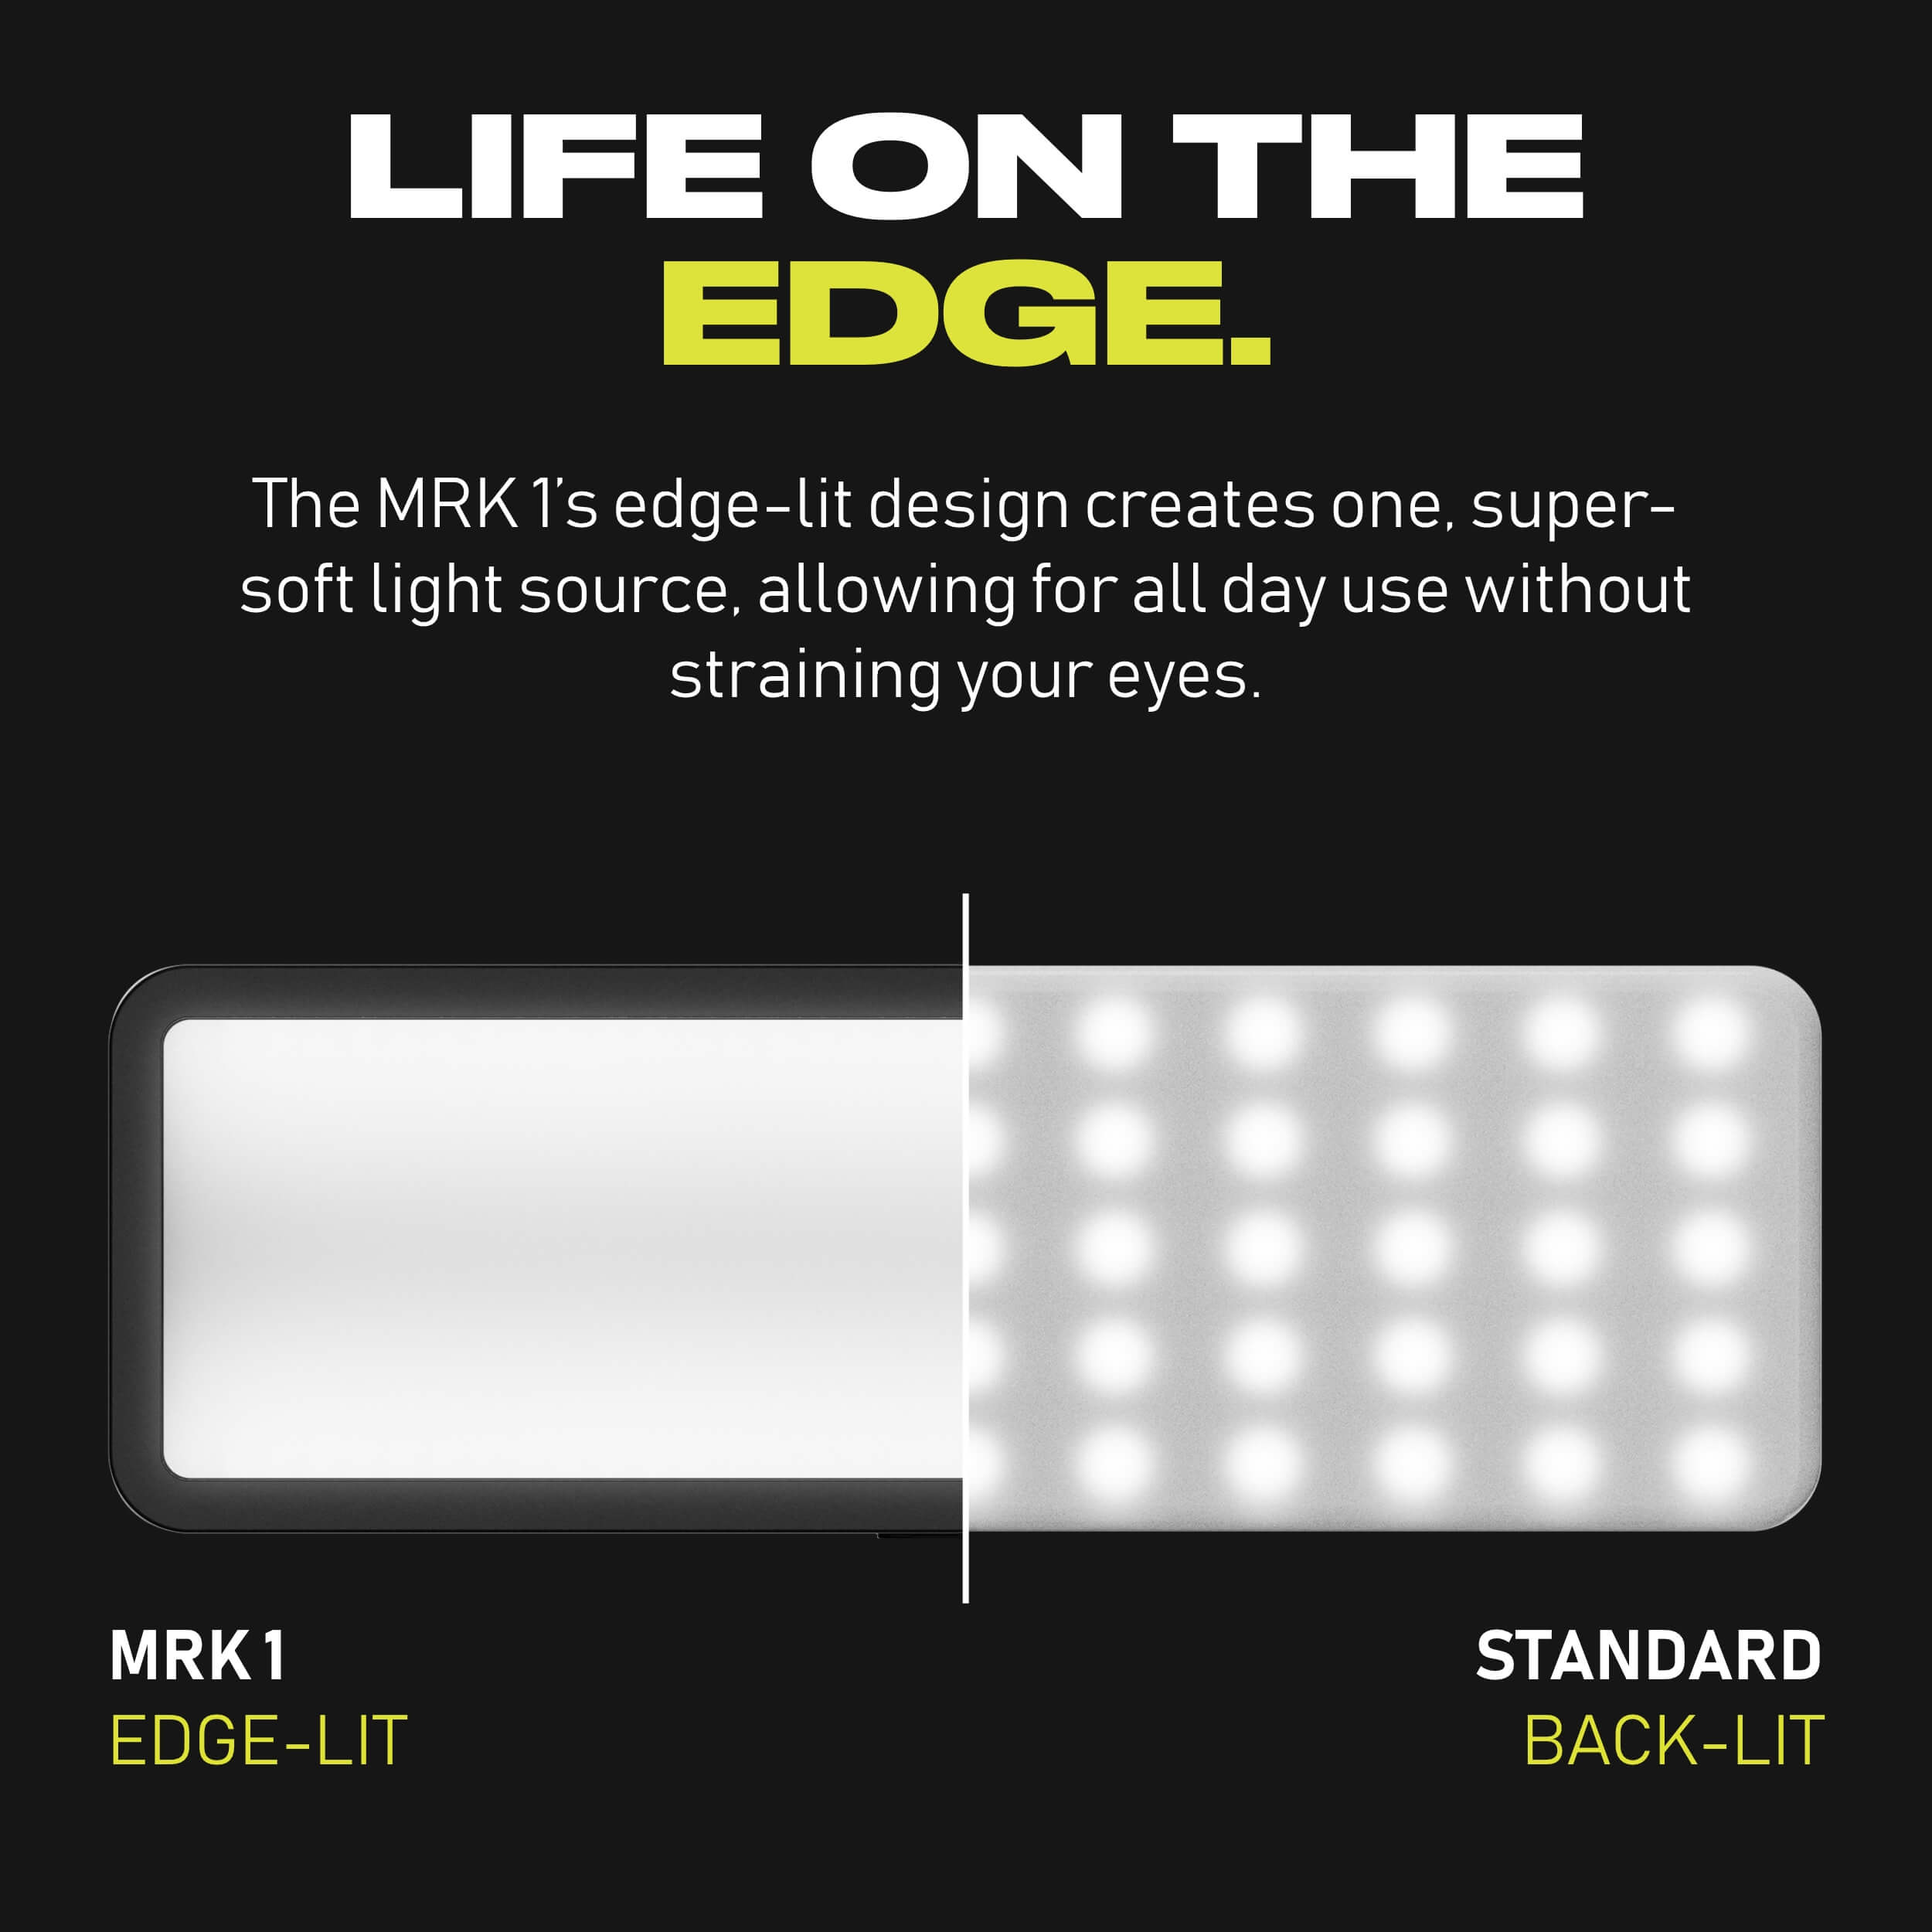 FUSE Light is edge-lit to not hurt your eyes and diffuse nicely